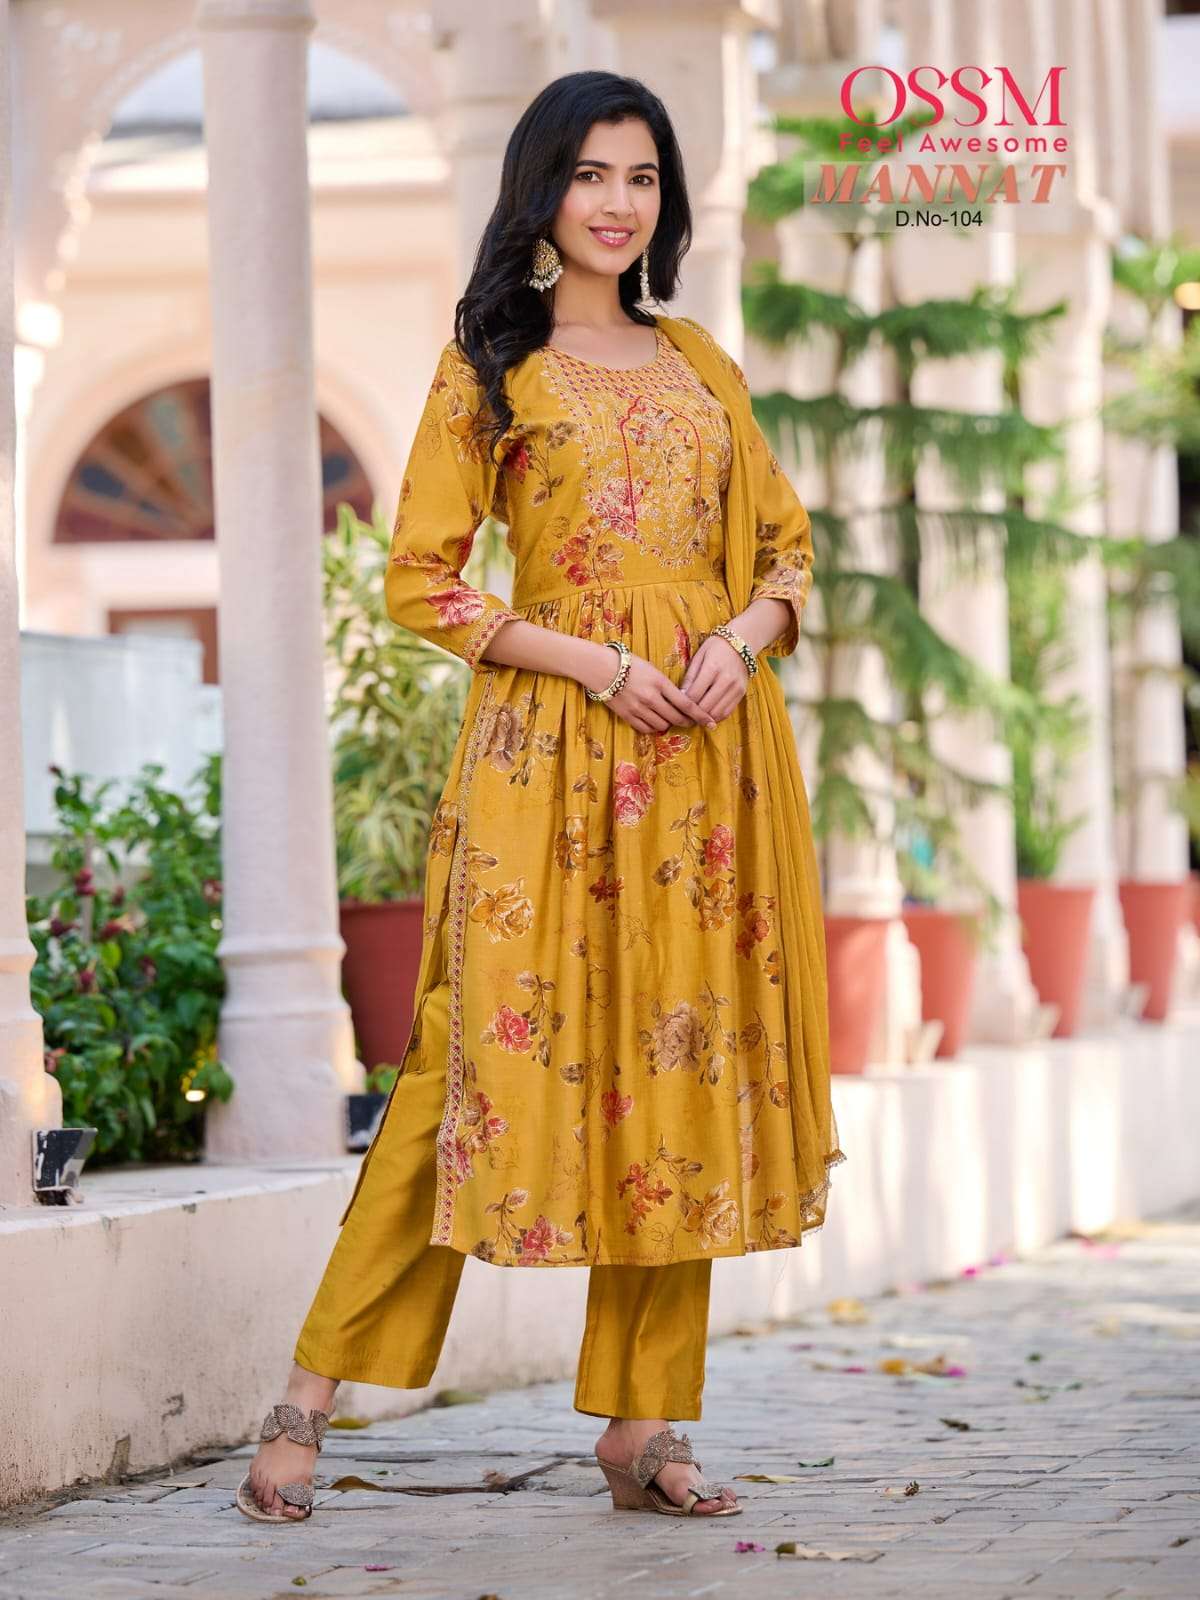 MANNAT VOL-3 BY OSSM 101 TO 106 SERIES BEAUTIFUL SUITS COLORFUL STYLISH FANCY CASUAL WEAR & ETHNIC WEAR MODAL CHANDERI PRINT DRESSES AT WHOLESALE PRICE